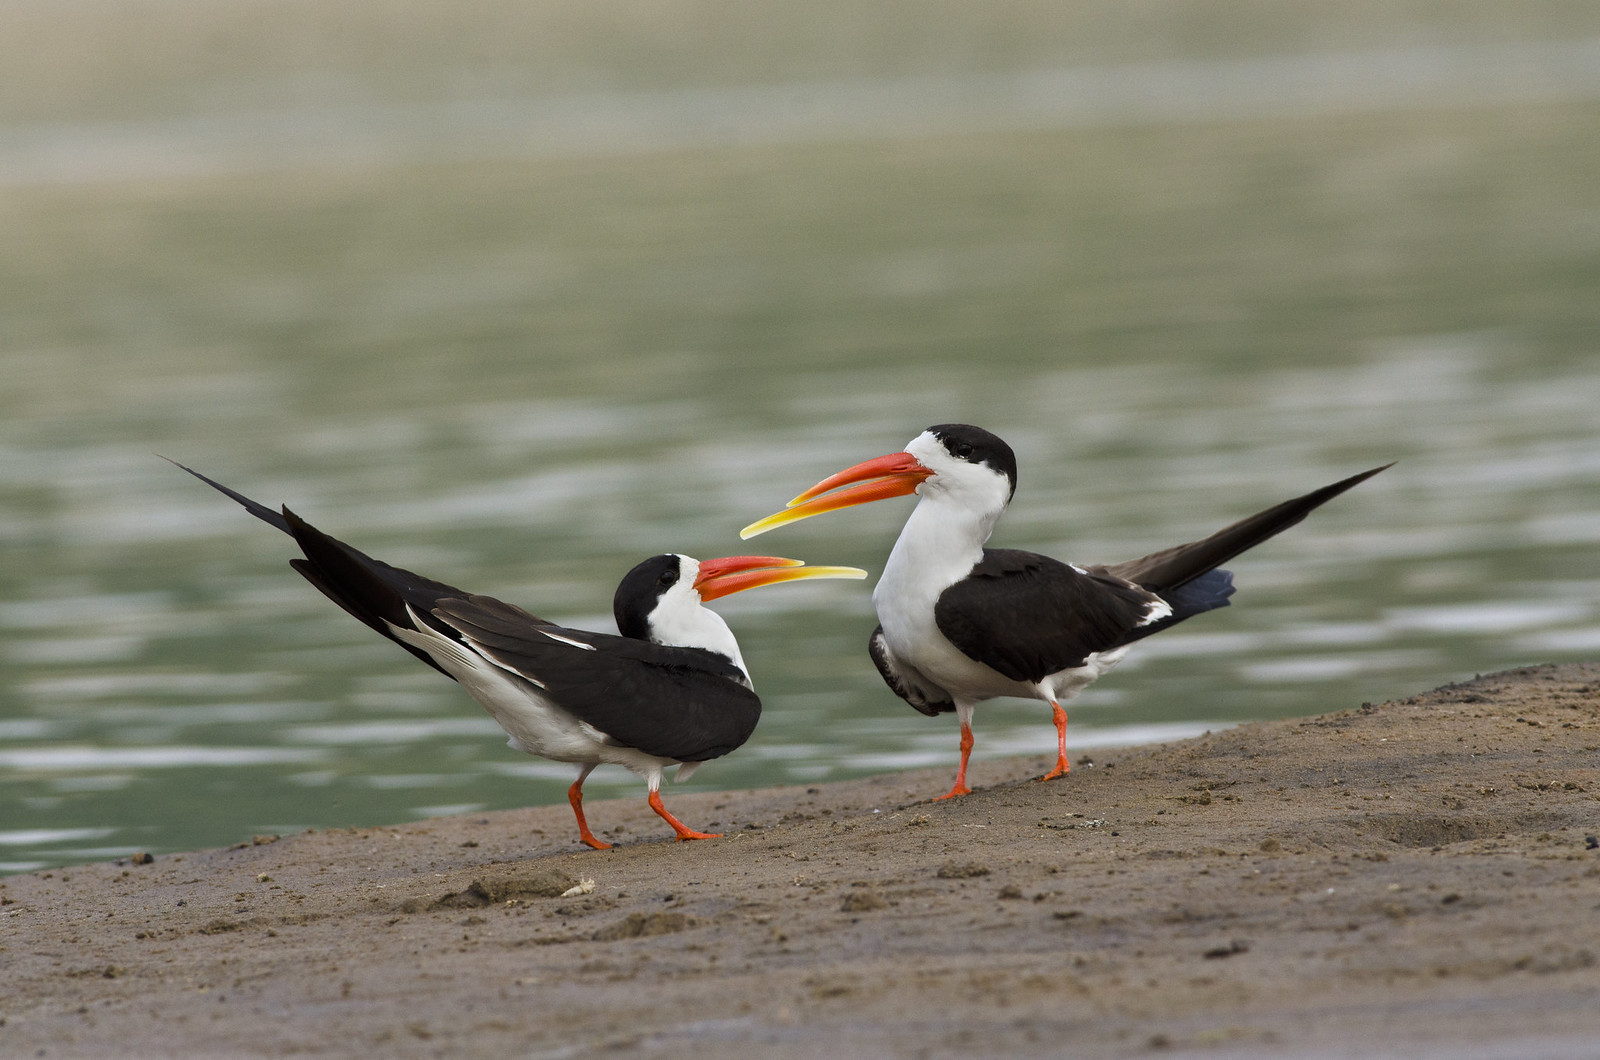 A photograph of the Indian Skimmer.